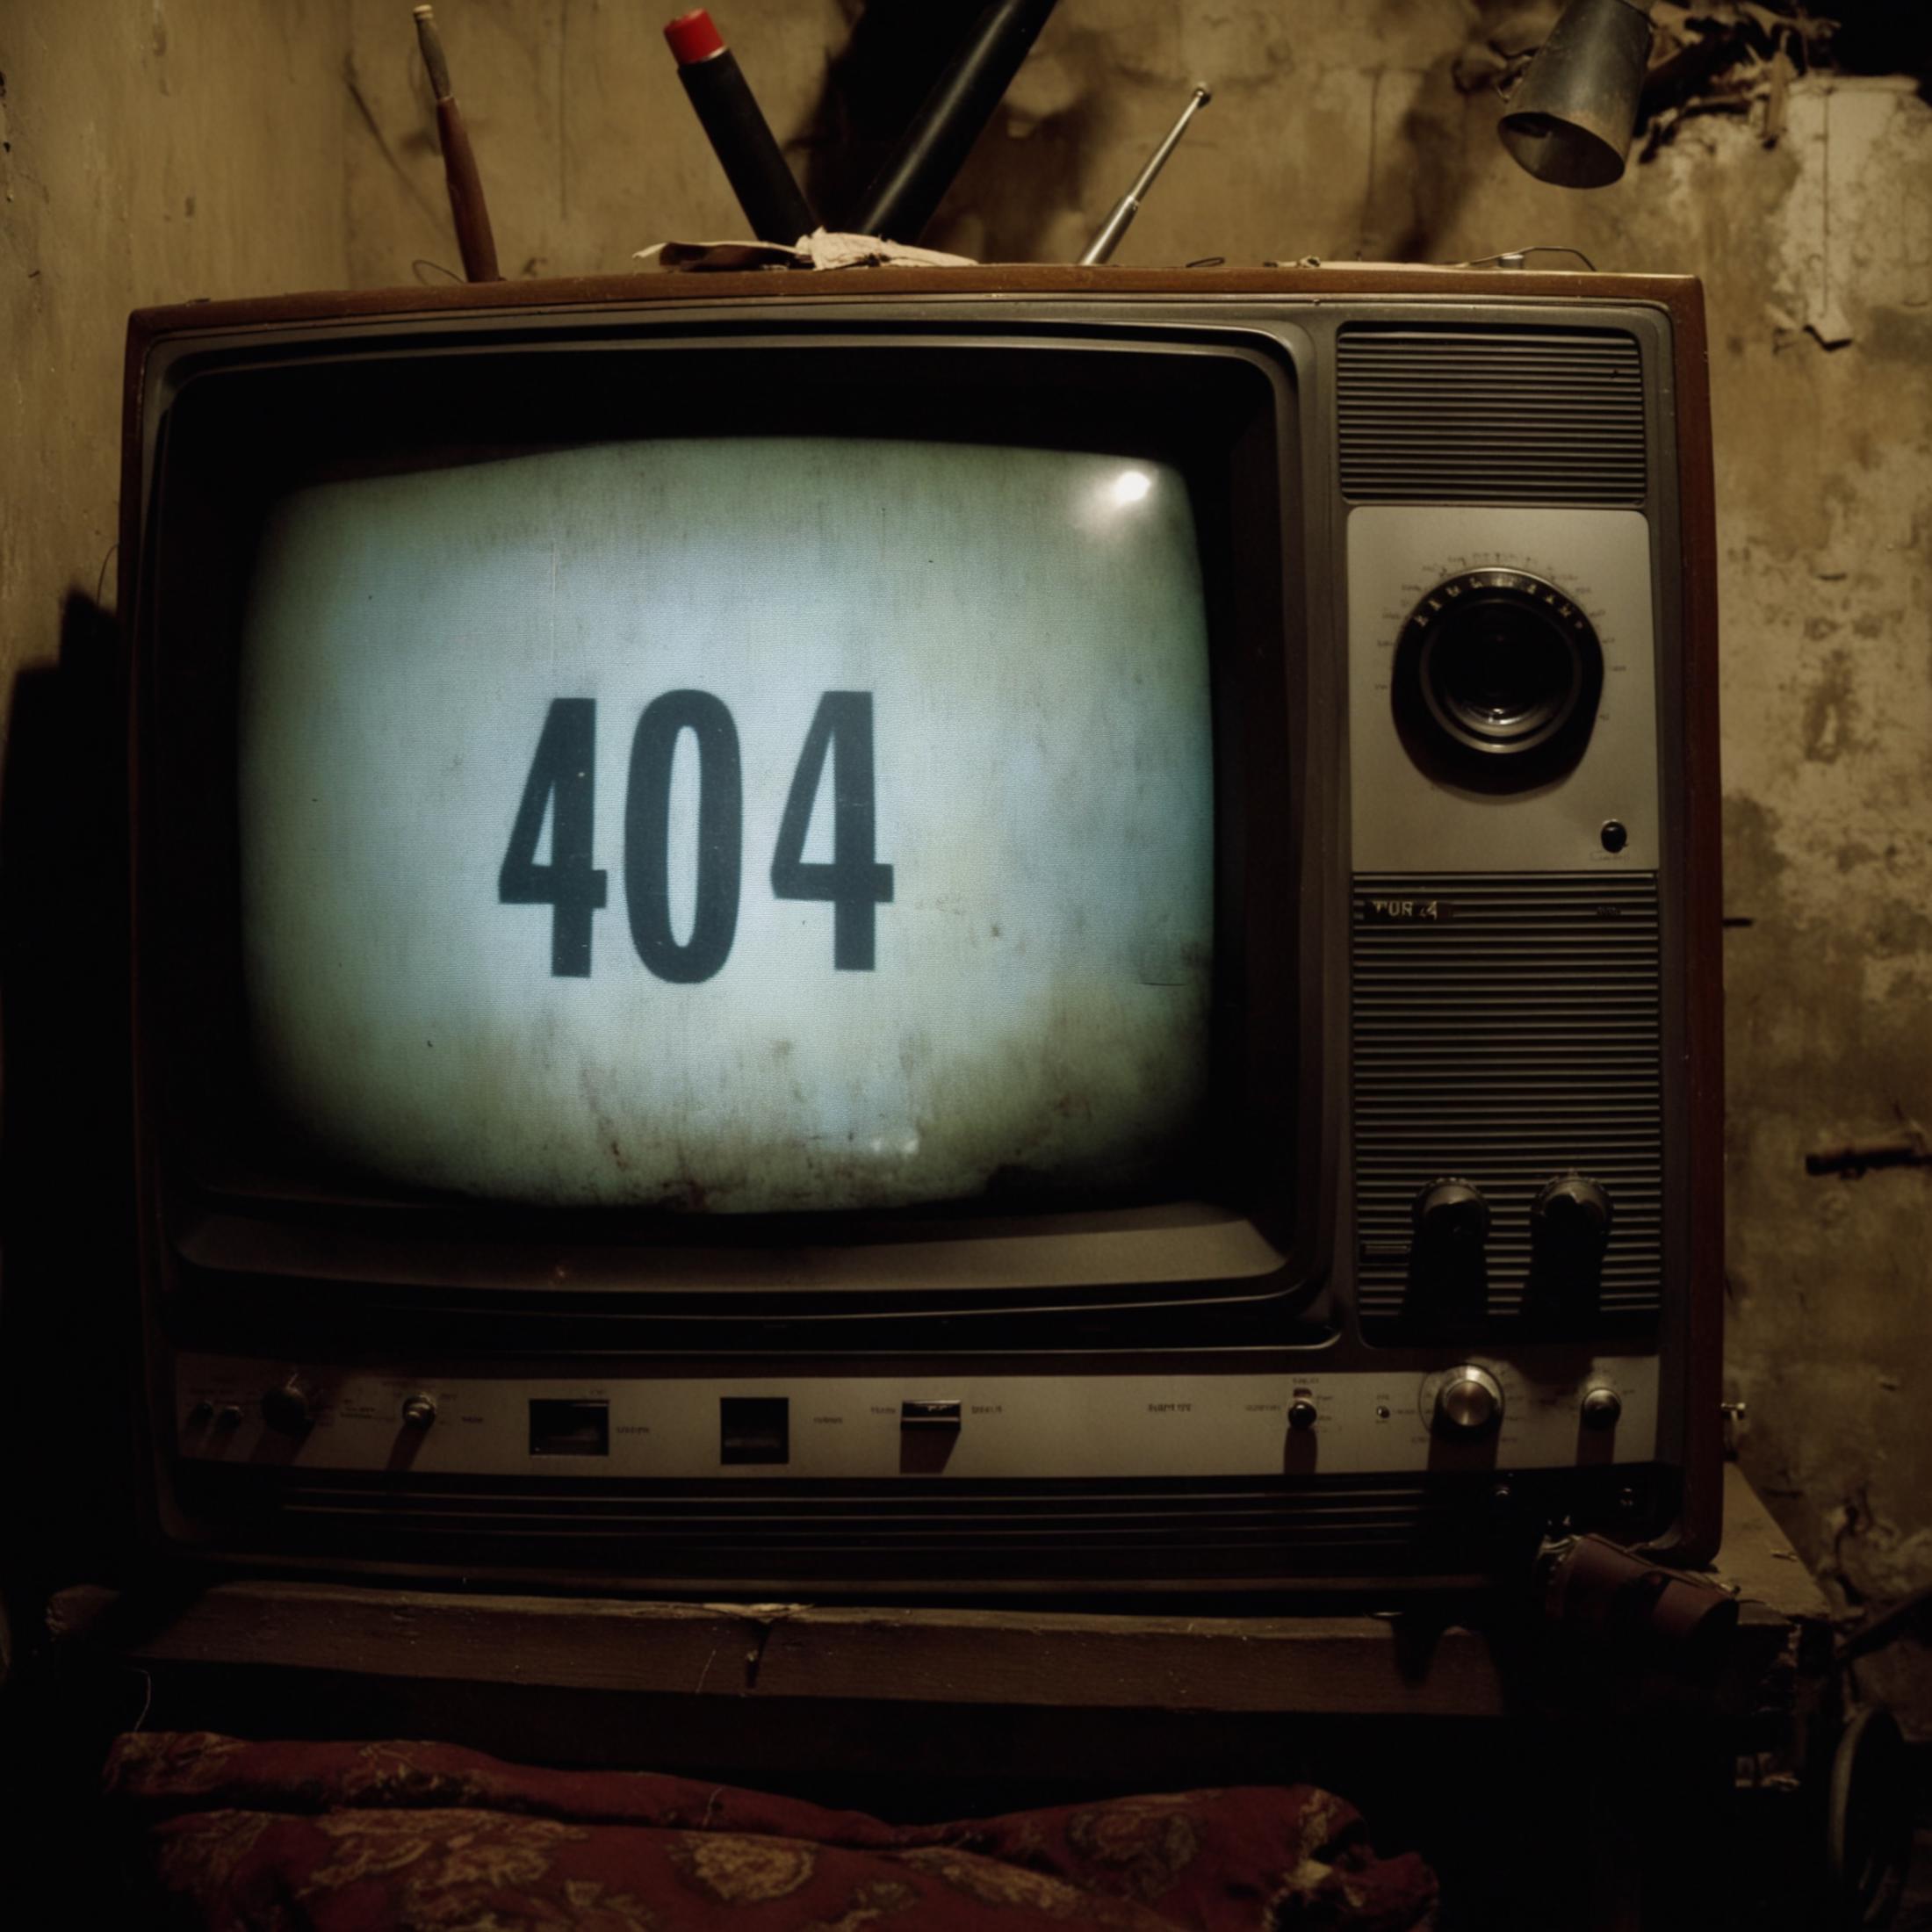 An old television displaying the number 404 with a red marker.